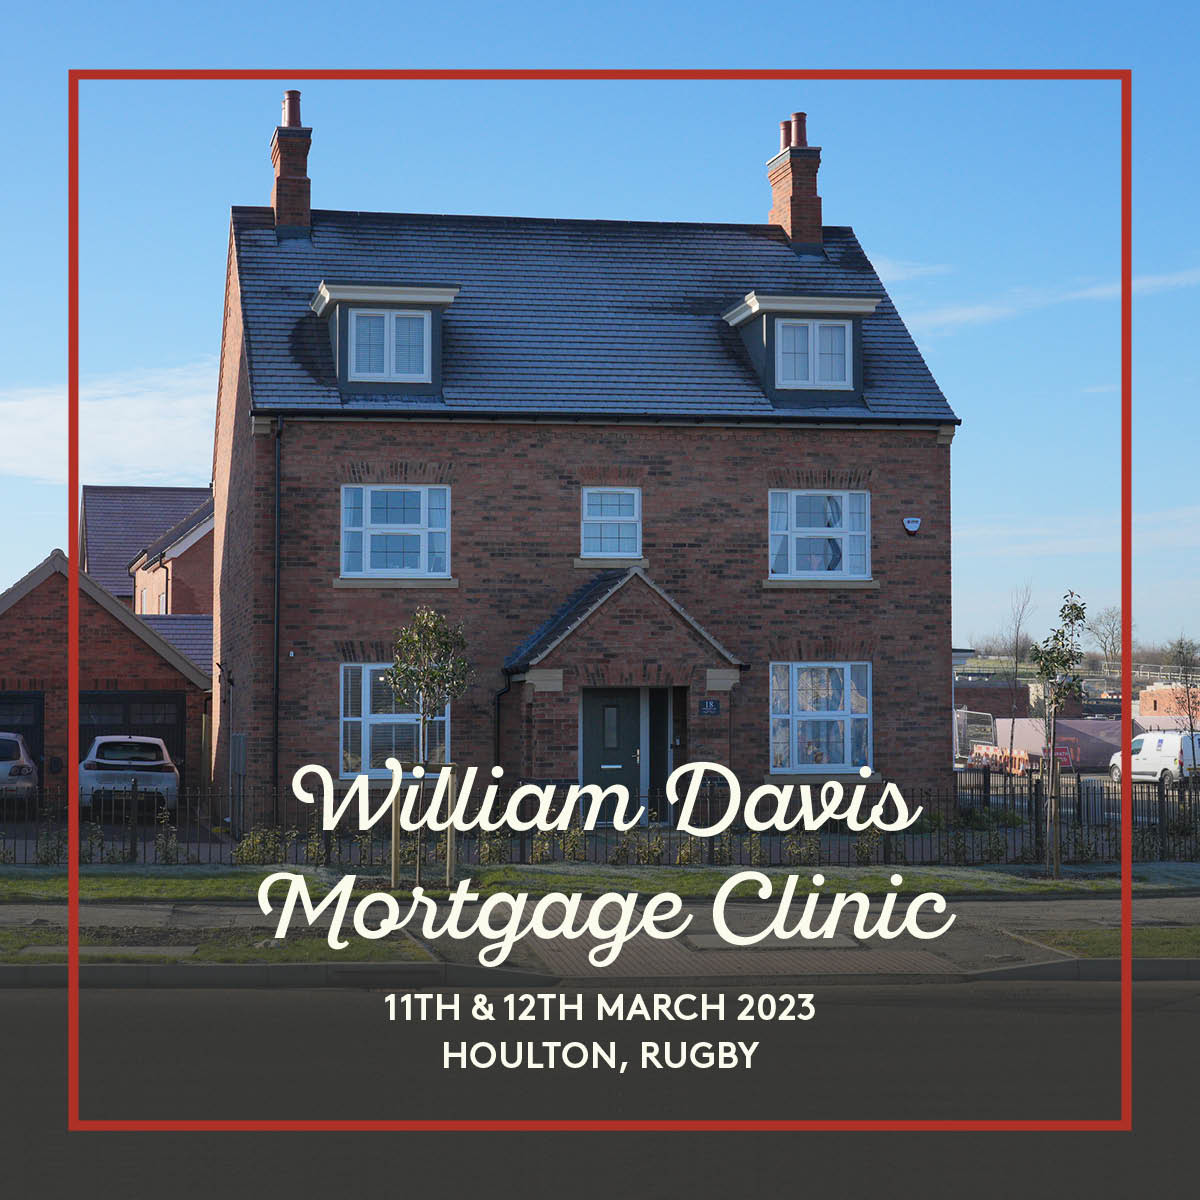 Looking for advice on buying a new home? 🏡 @WilliamDavisNH are here to help you discover offers and options to buying your next home with helpful mortgage advice from the experts, hosted in one of their beautiful show homes. Register today ➡️ loom.ly/sxgK6rg